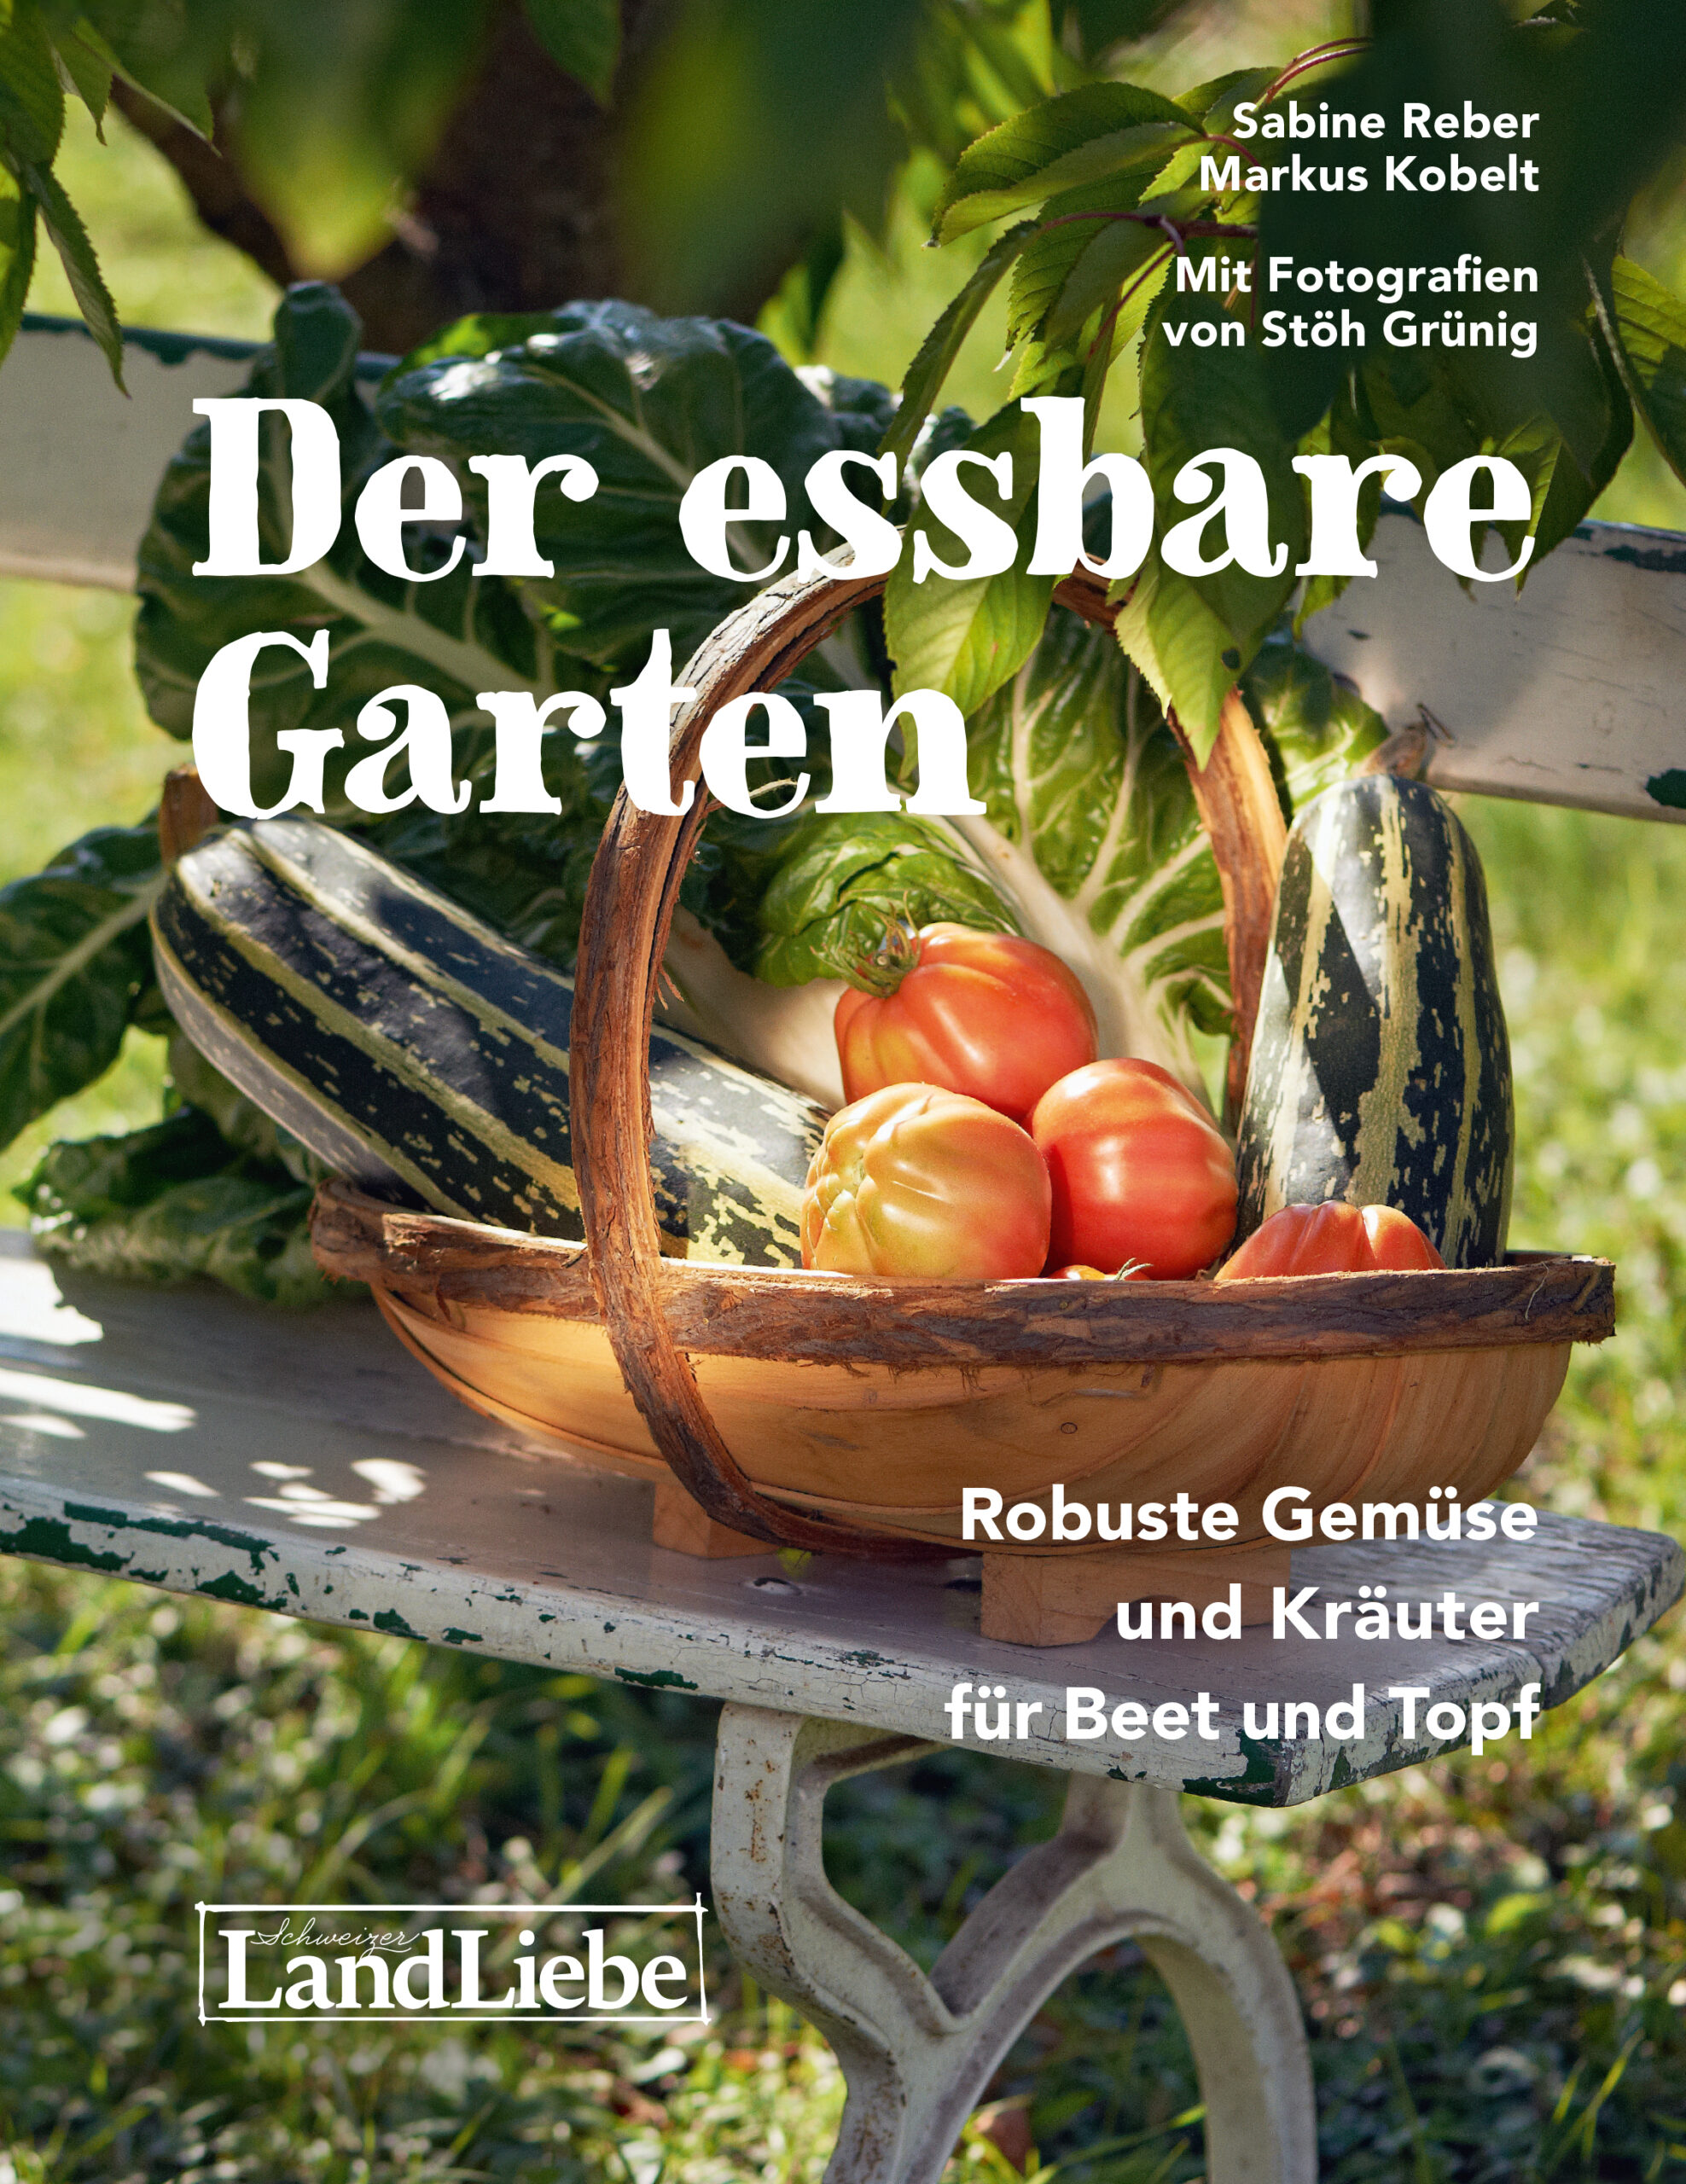 You are currently viewing Gartenlesung bei Lüthi in Biel